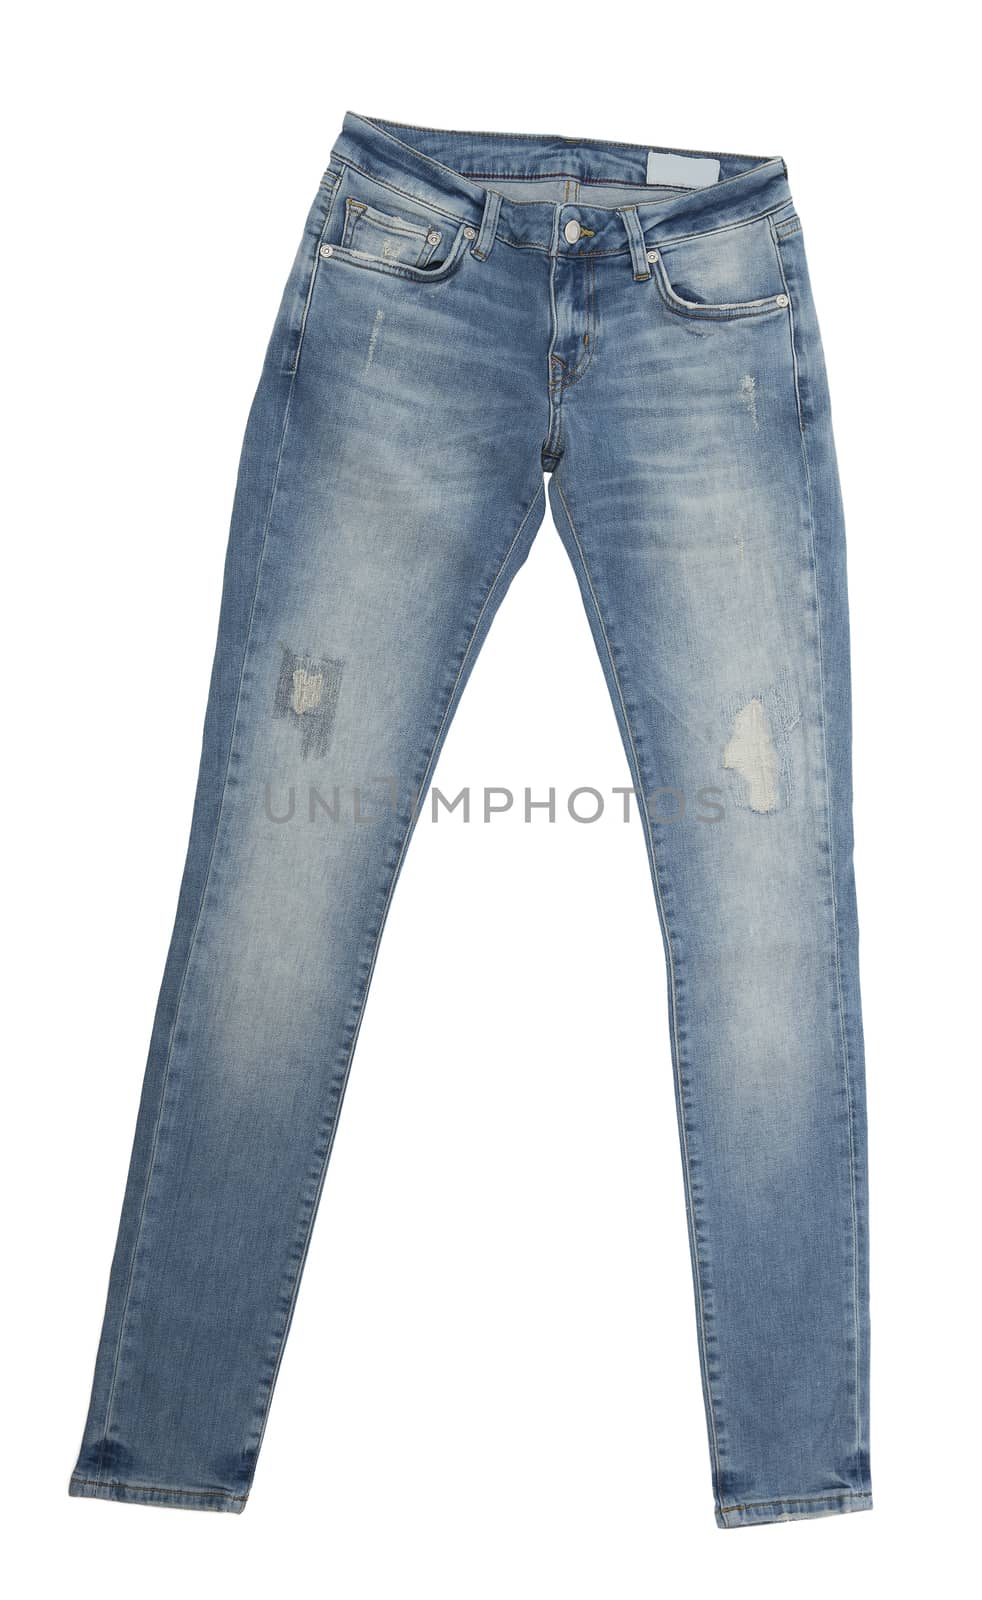 Blue Jeans isolated on white background